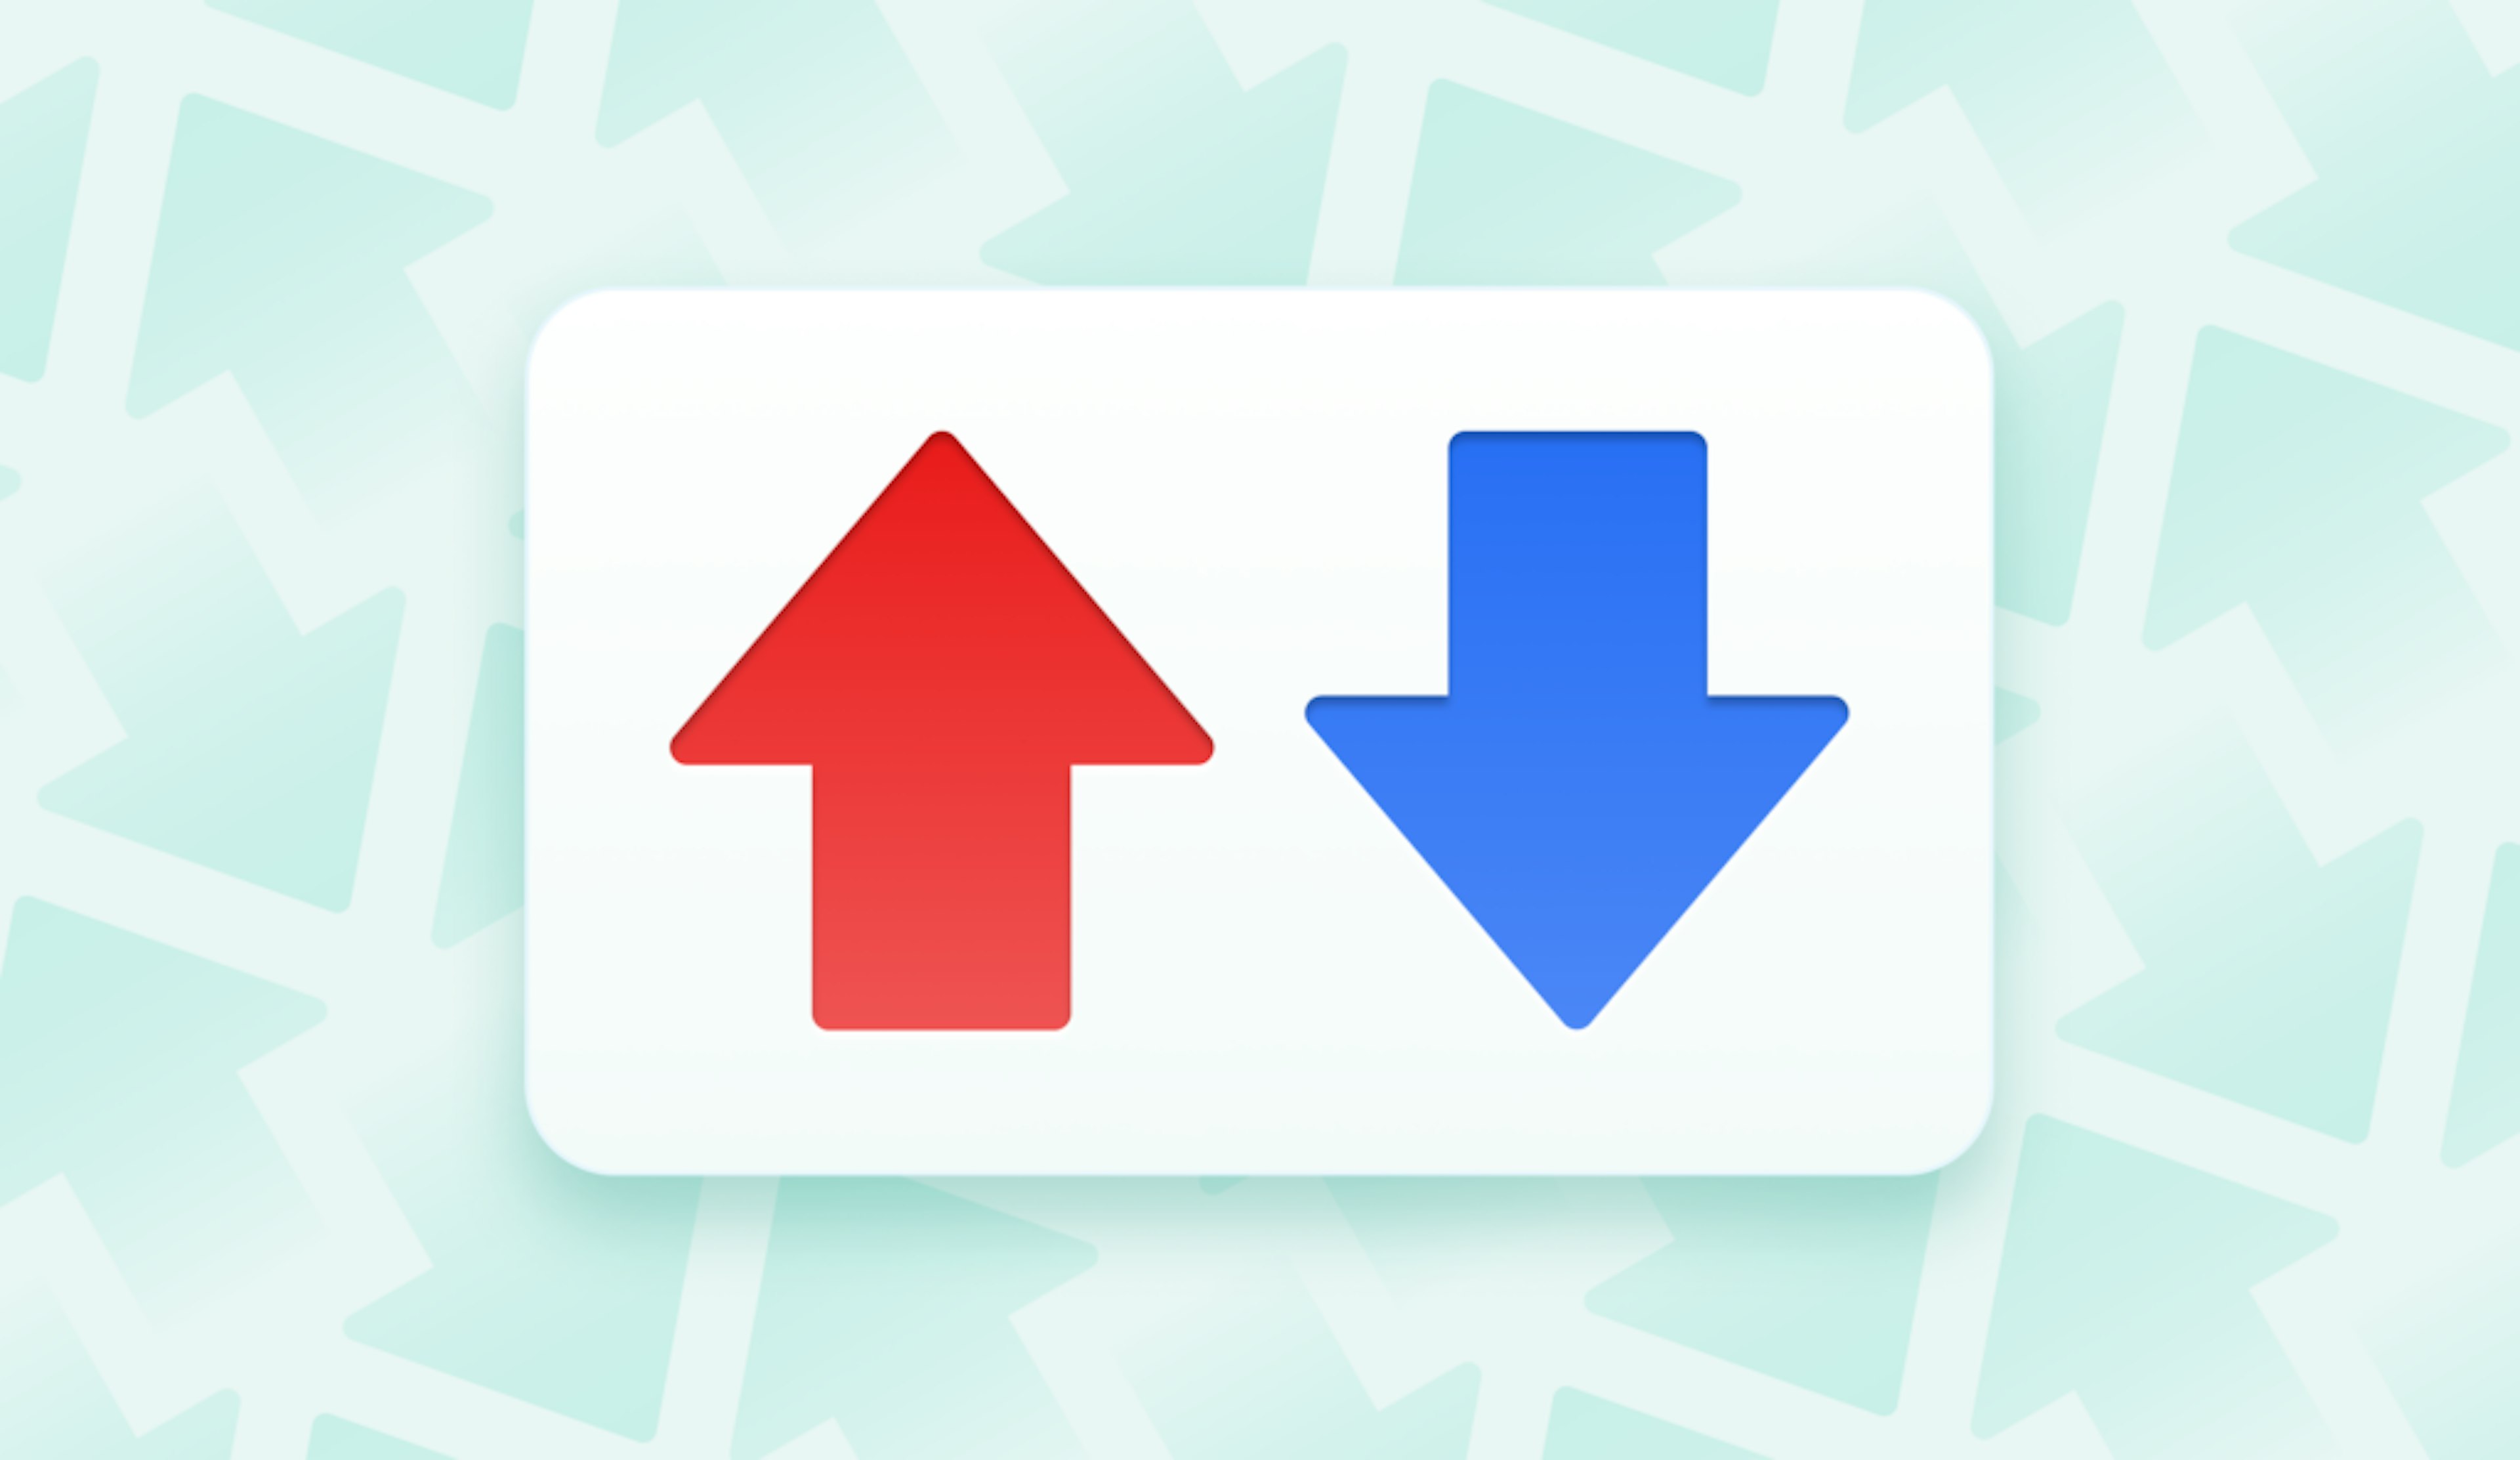 Reddit: Up and down voting arrows